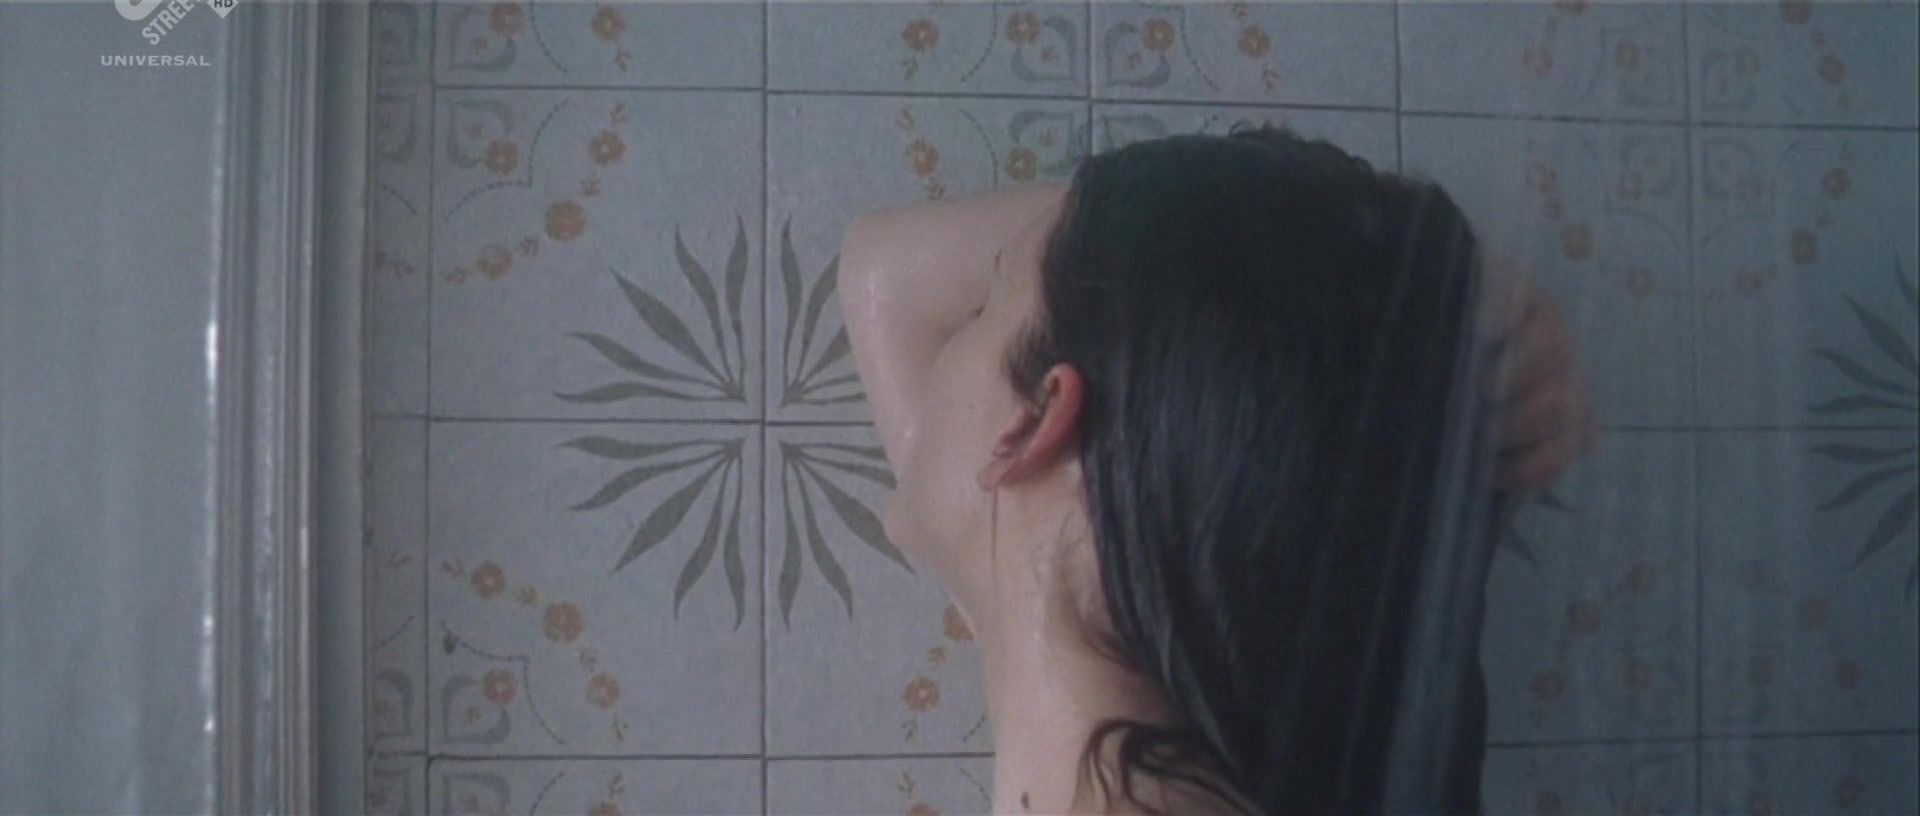 Submissive Topless Melanie Laurent from Shower Video of the French movie "La chambre des morts" Anal Creampie